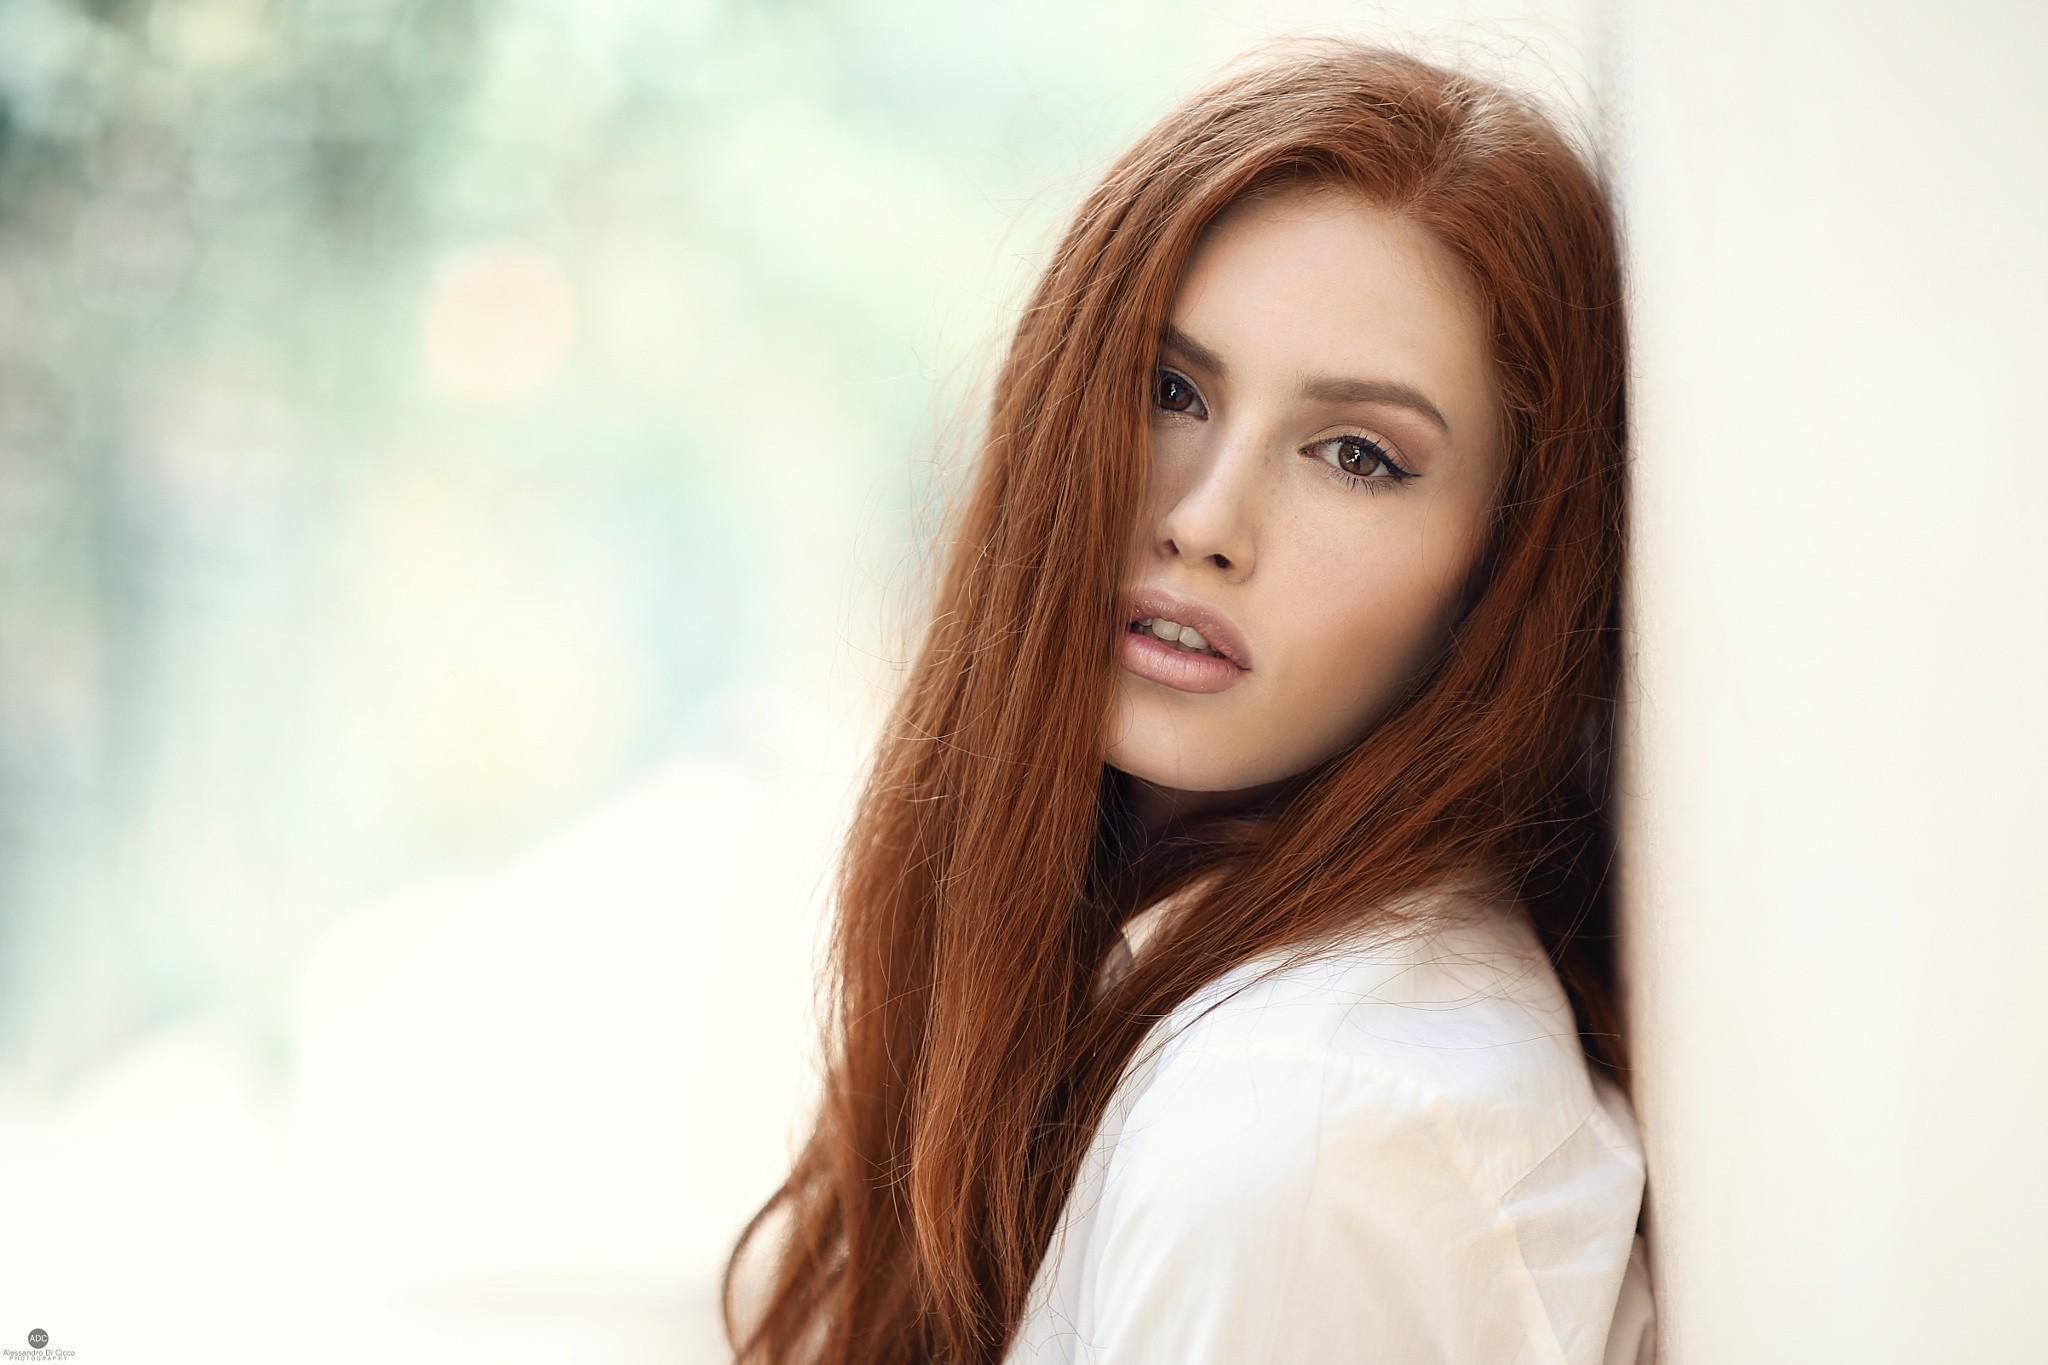 HD wallpaper, Open Mouth, Juicy Lips, Brown Eyes, Redhead, Valentina Galassi, Alessandro Di Cicco, Face, White Clothing, Model, Women, Portrait